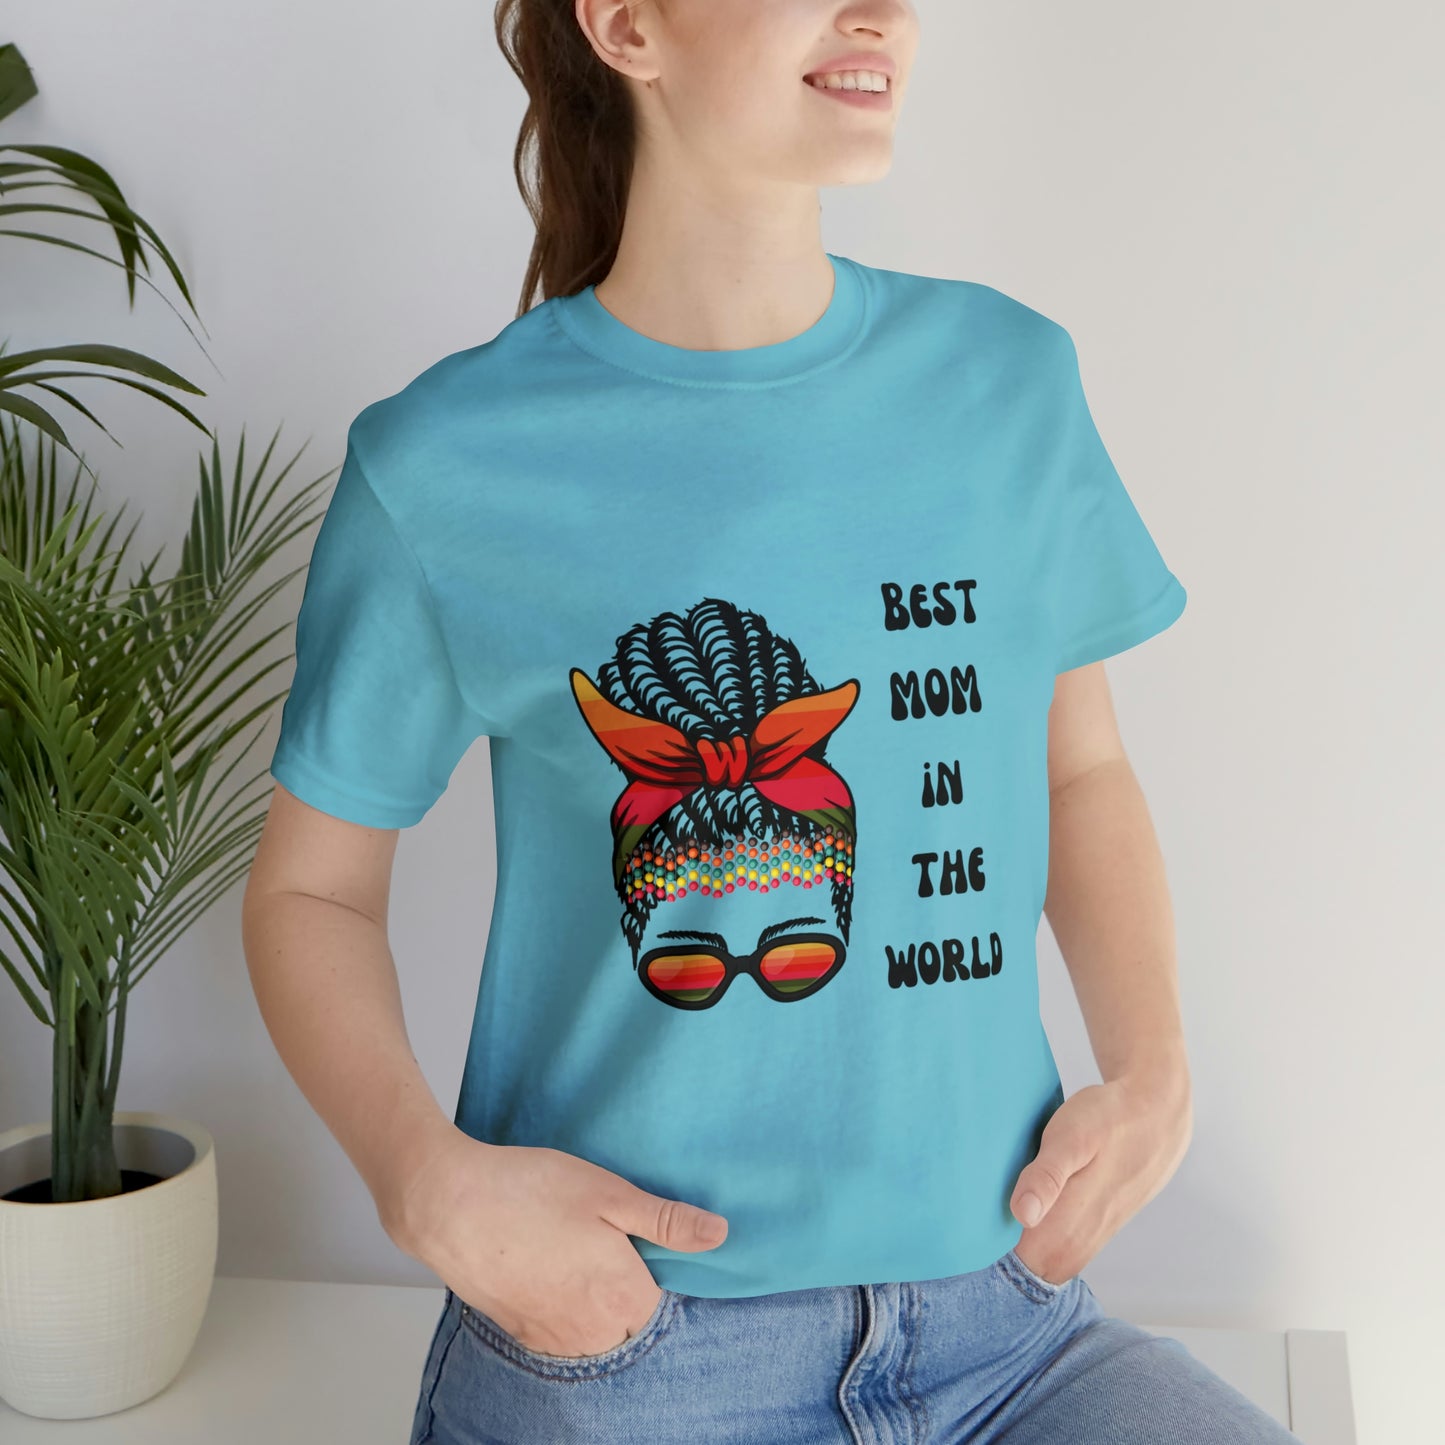 Best Mom In the World Tee